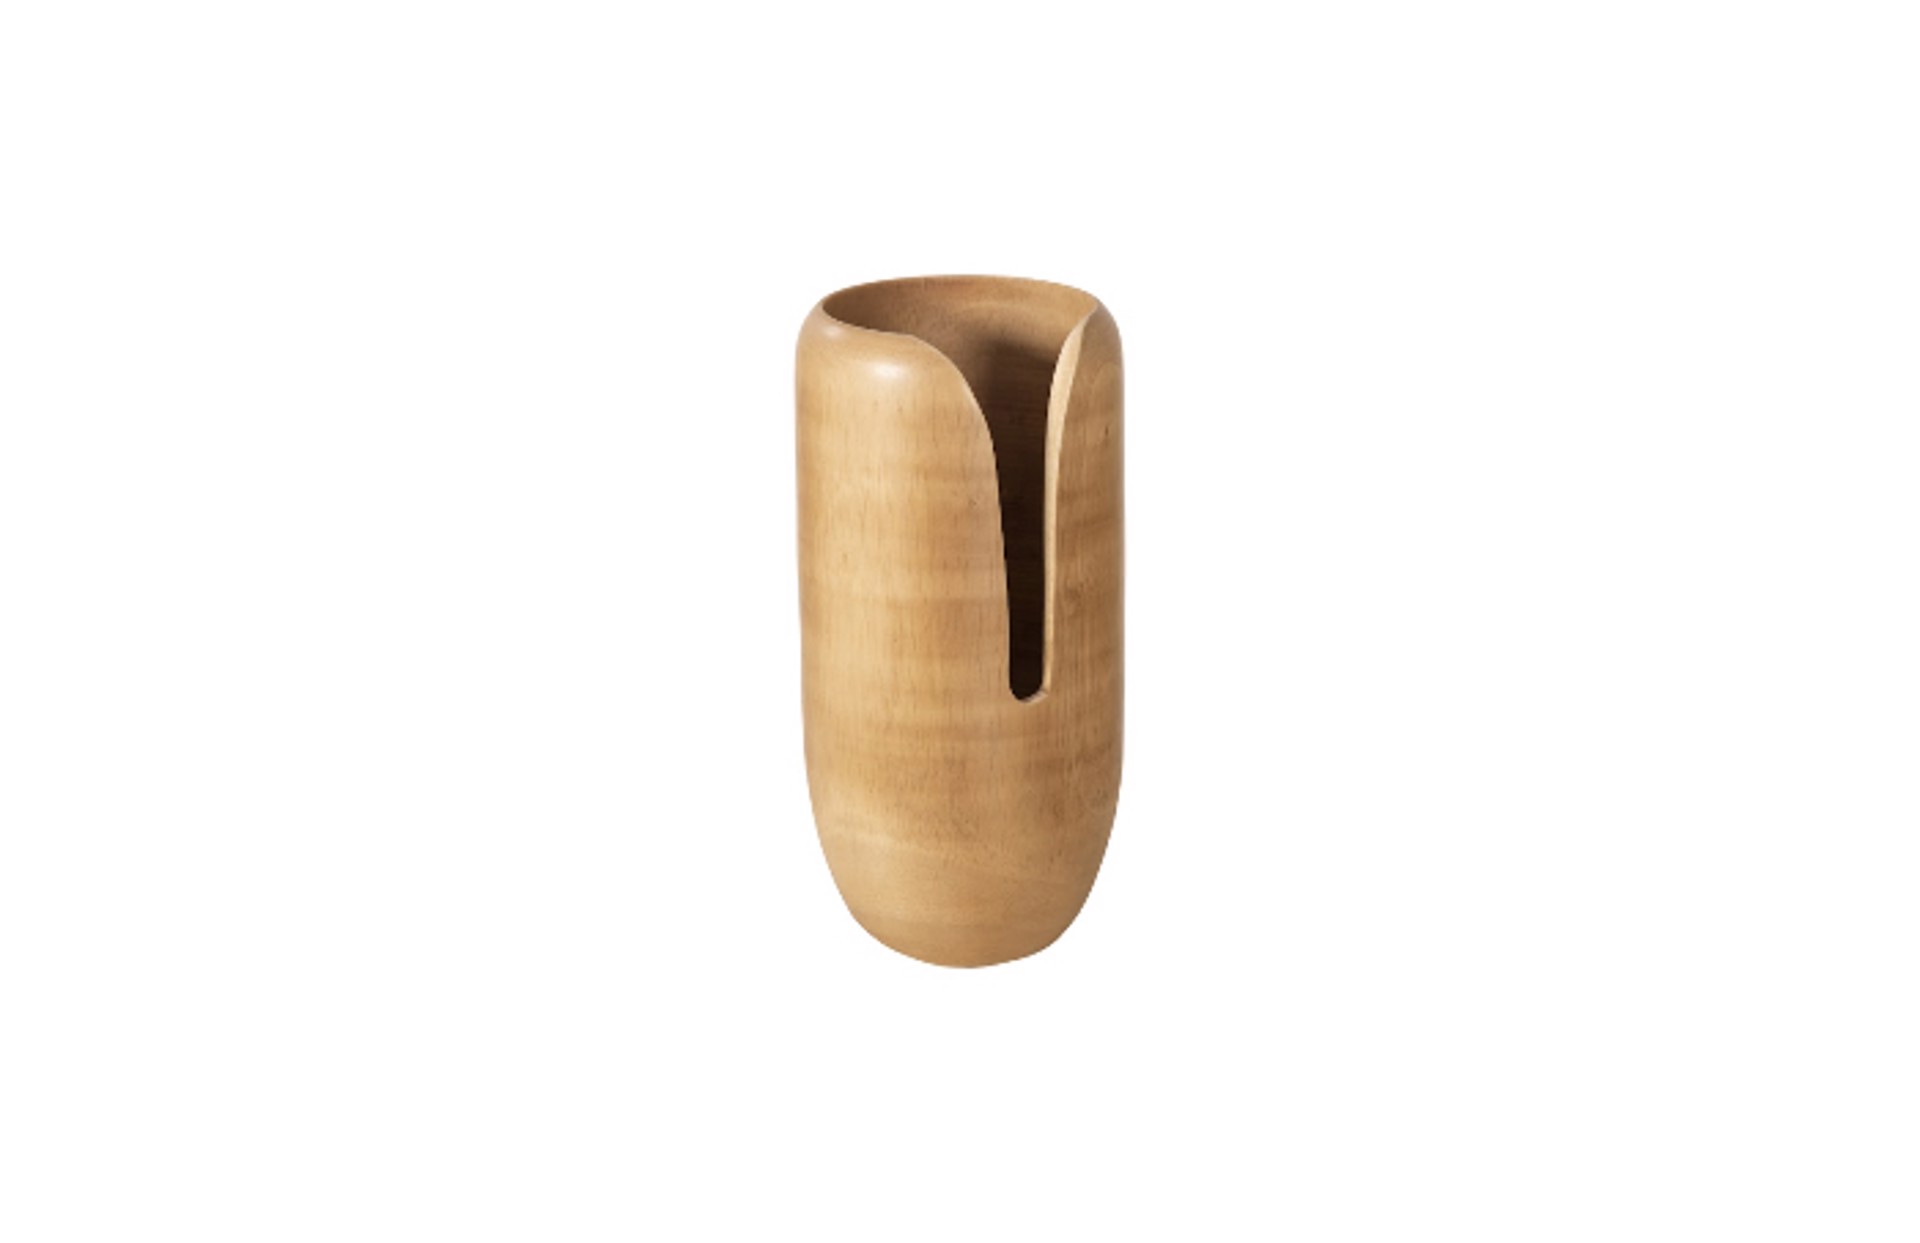 Small Wood Vase by Sculpture